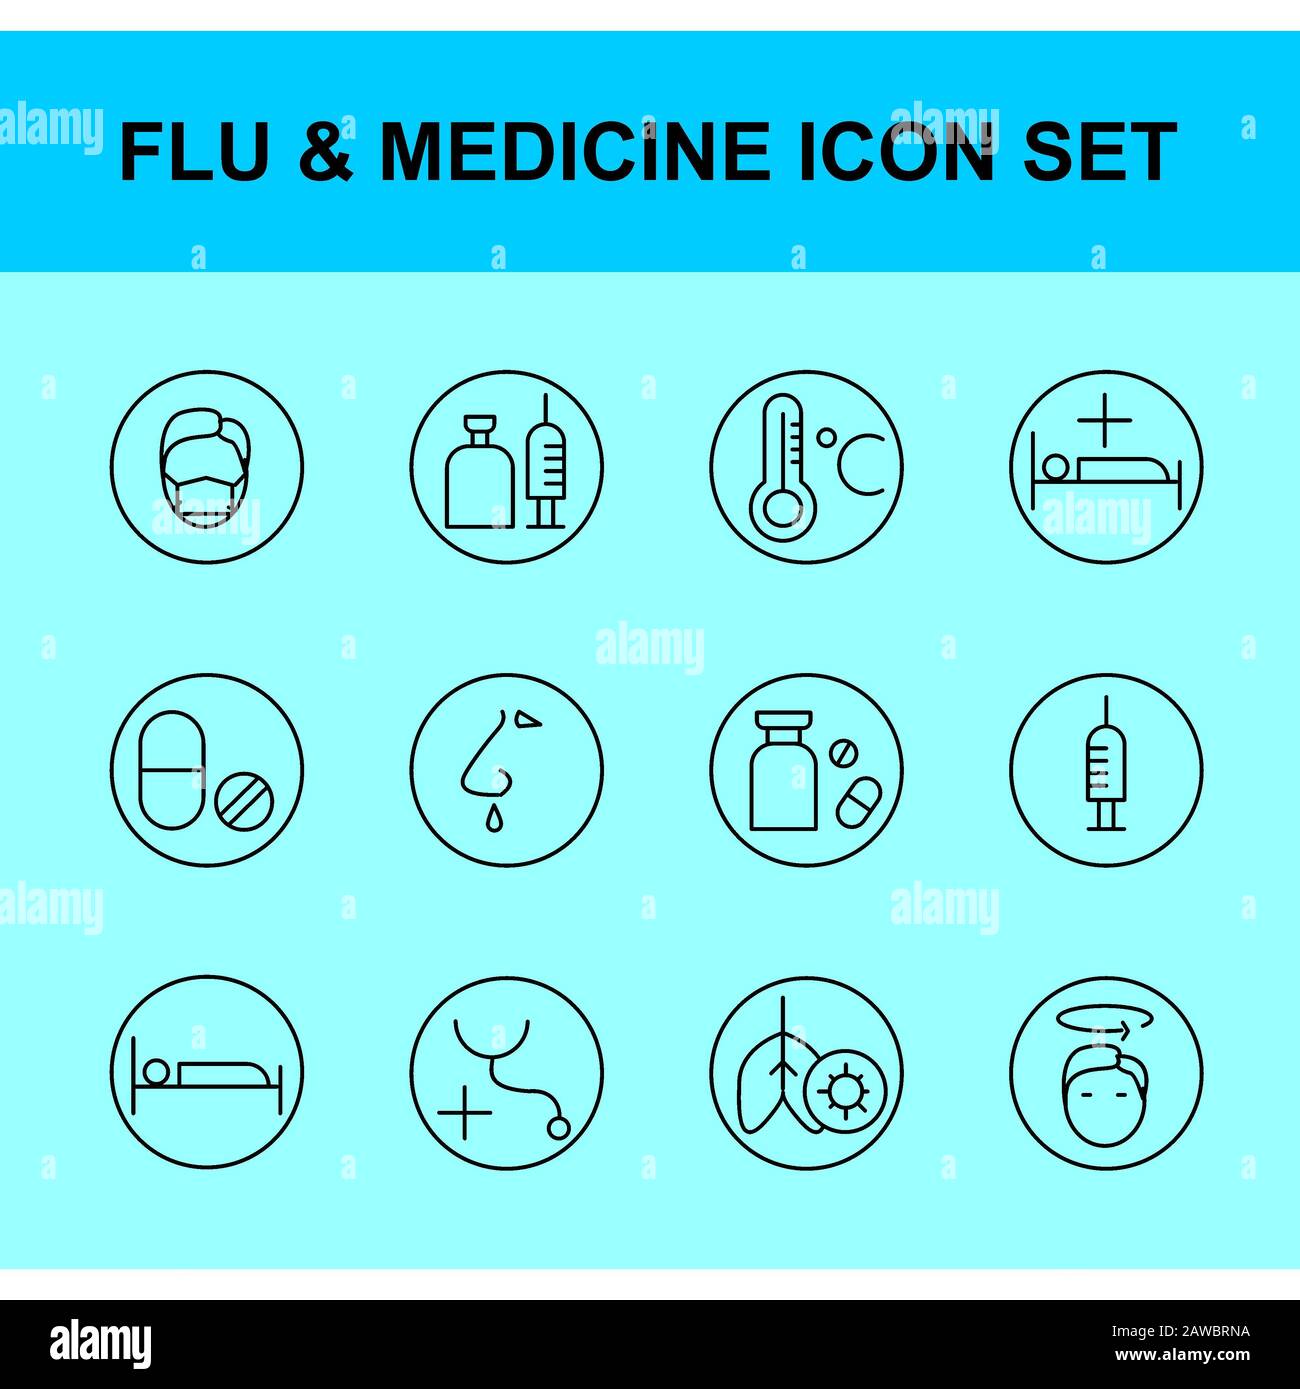 influenza and medicine icon set. Outline style.Flu, fever,cold, Virus, corona, lung, wash, hand, bottle, tablet, vaccine, bed, rest, anti-virus, sprea Stock Photo